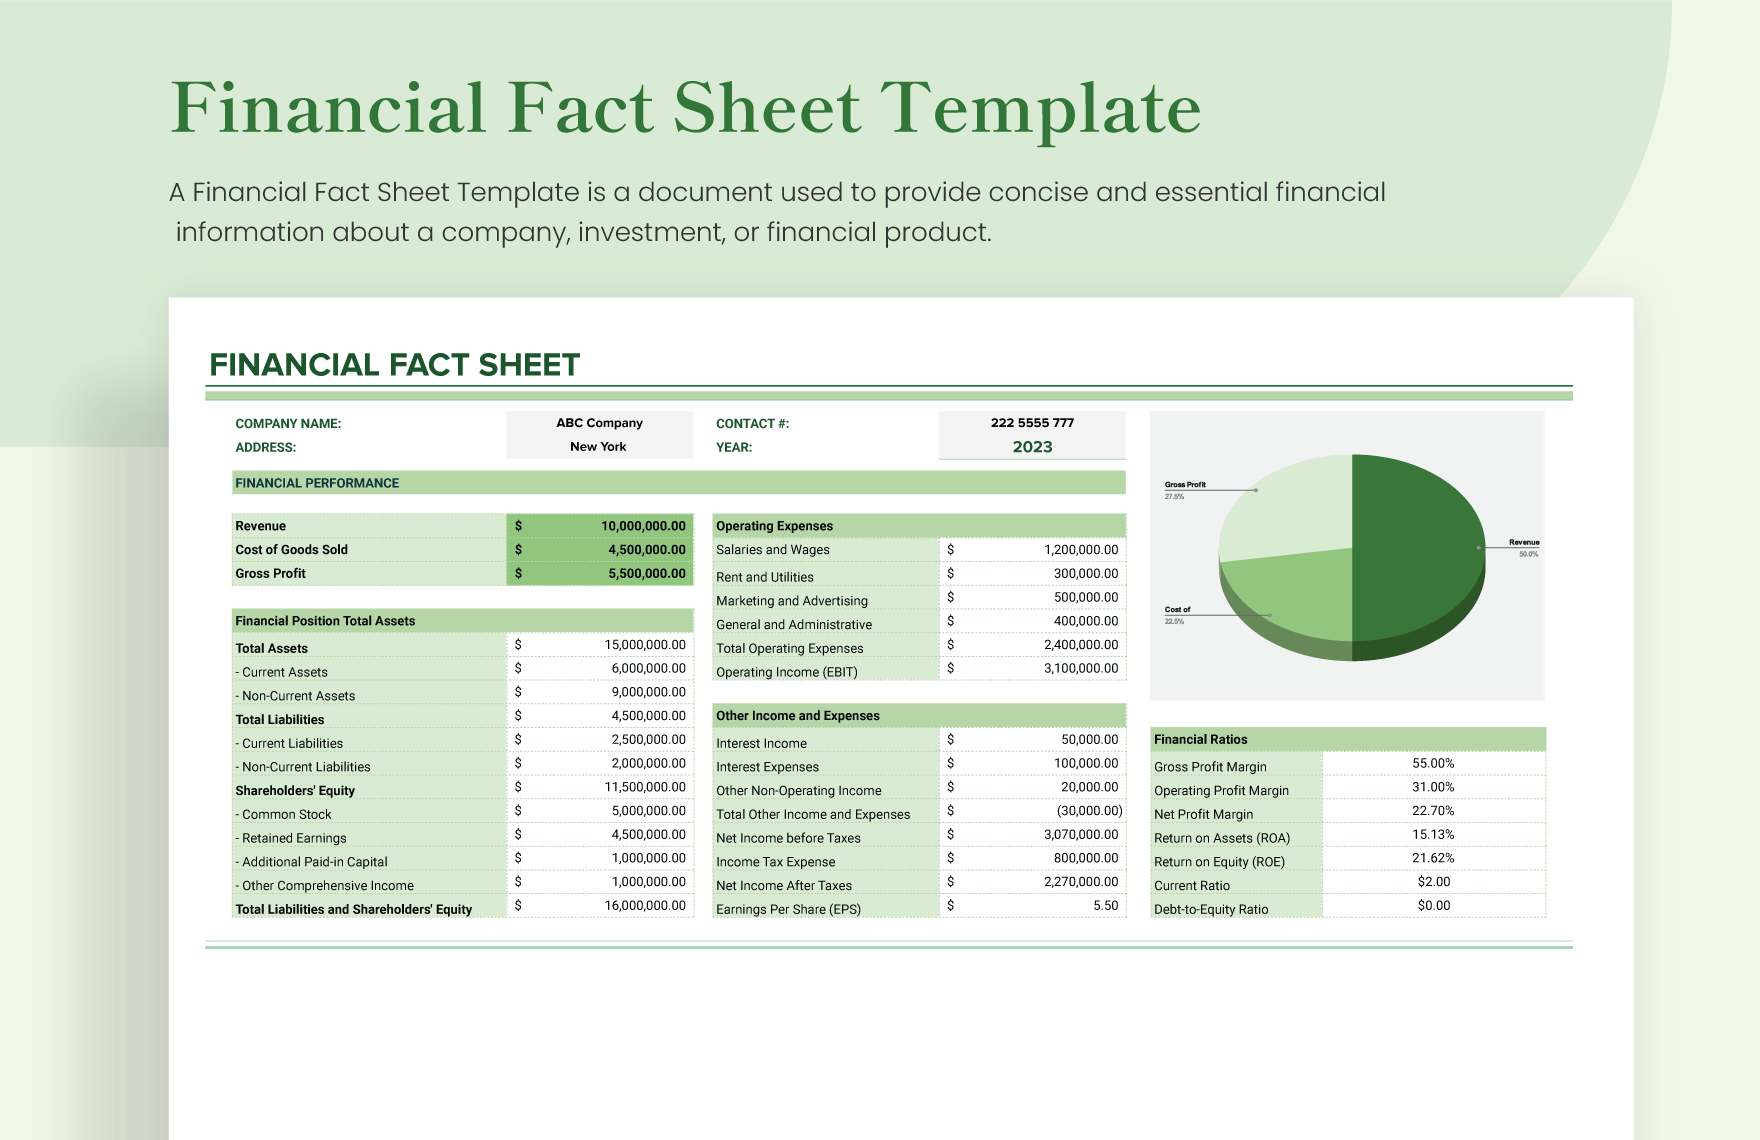 Financial Fact Sheet Template in Excel, Google Sheets